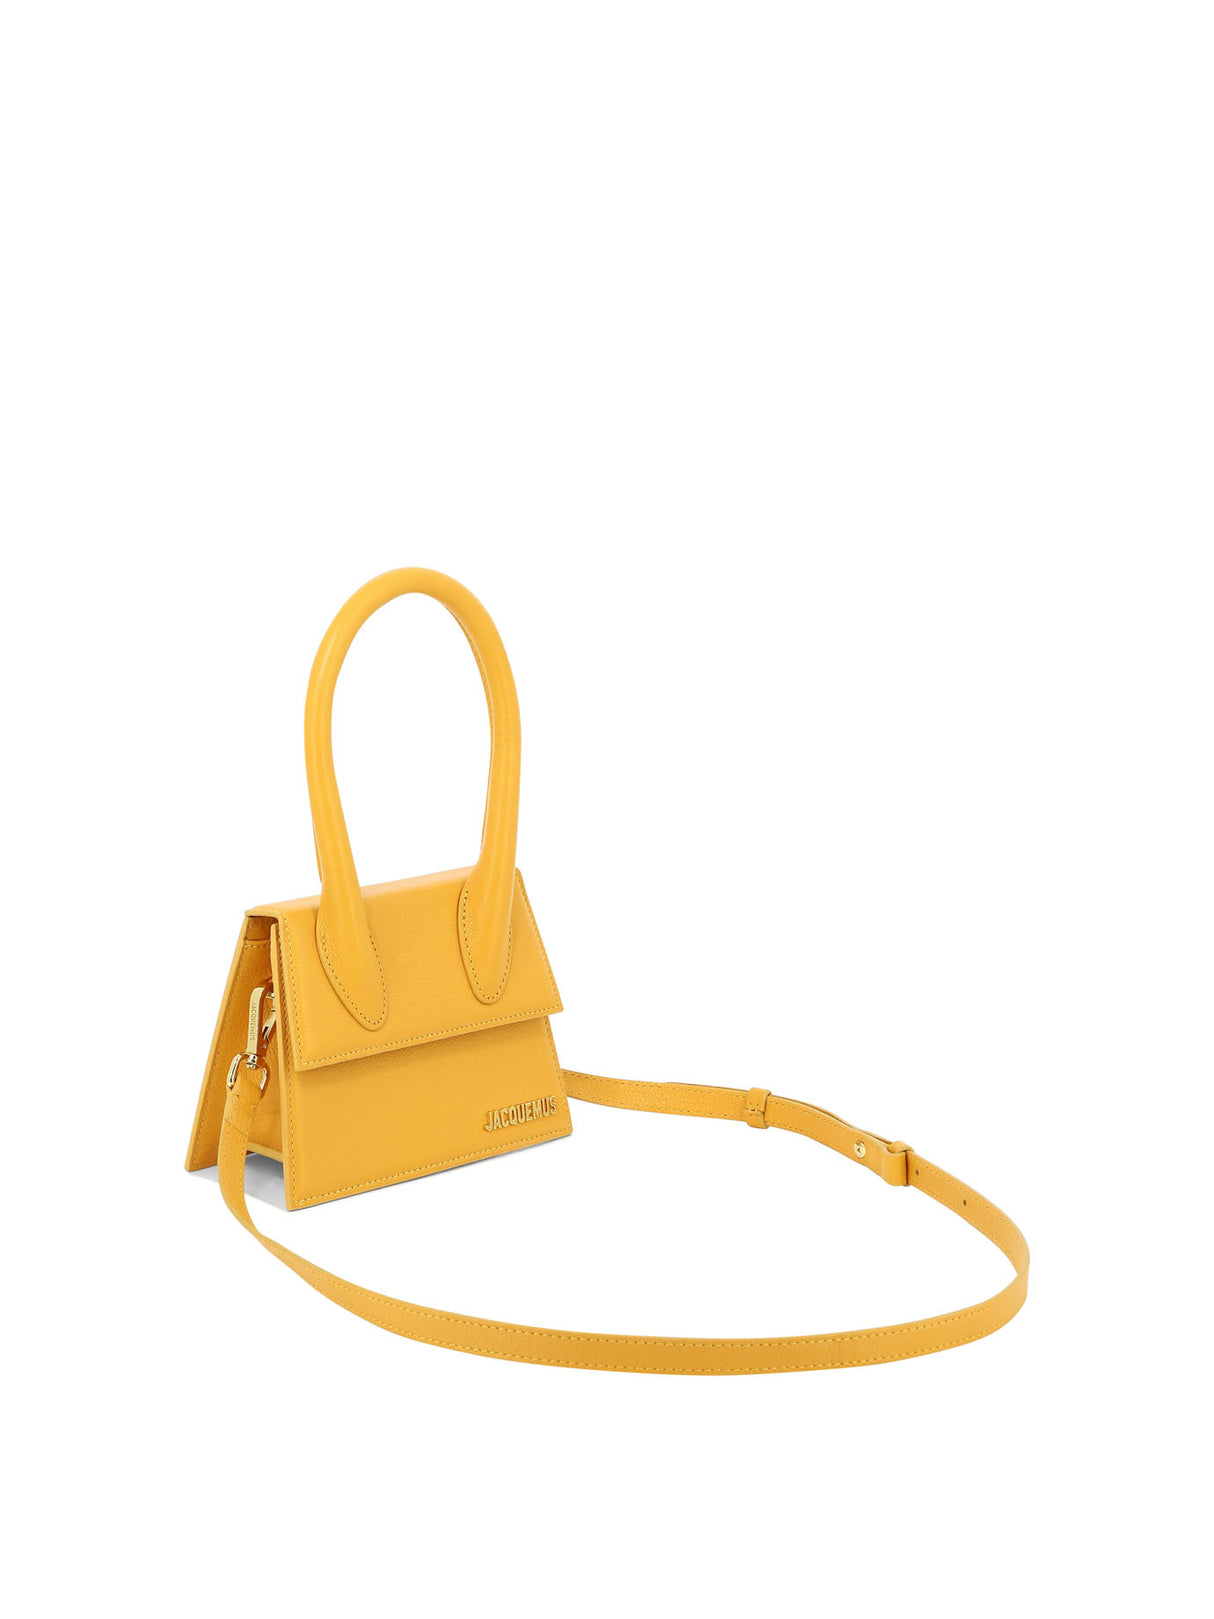 JACQUEMUS Stylish Orange Leather Top-Handle Handbag for Women - Carry All Your Essentials with Ease!